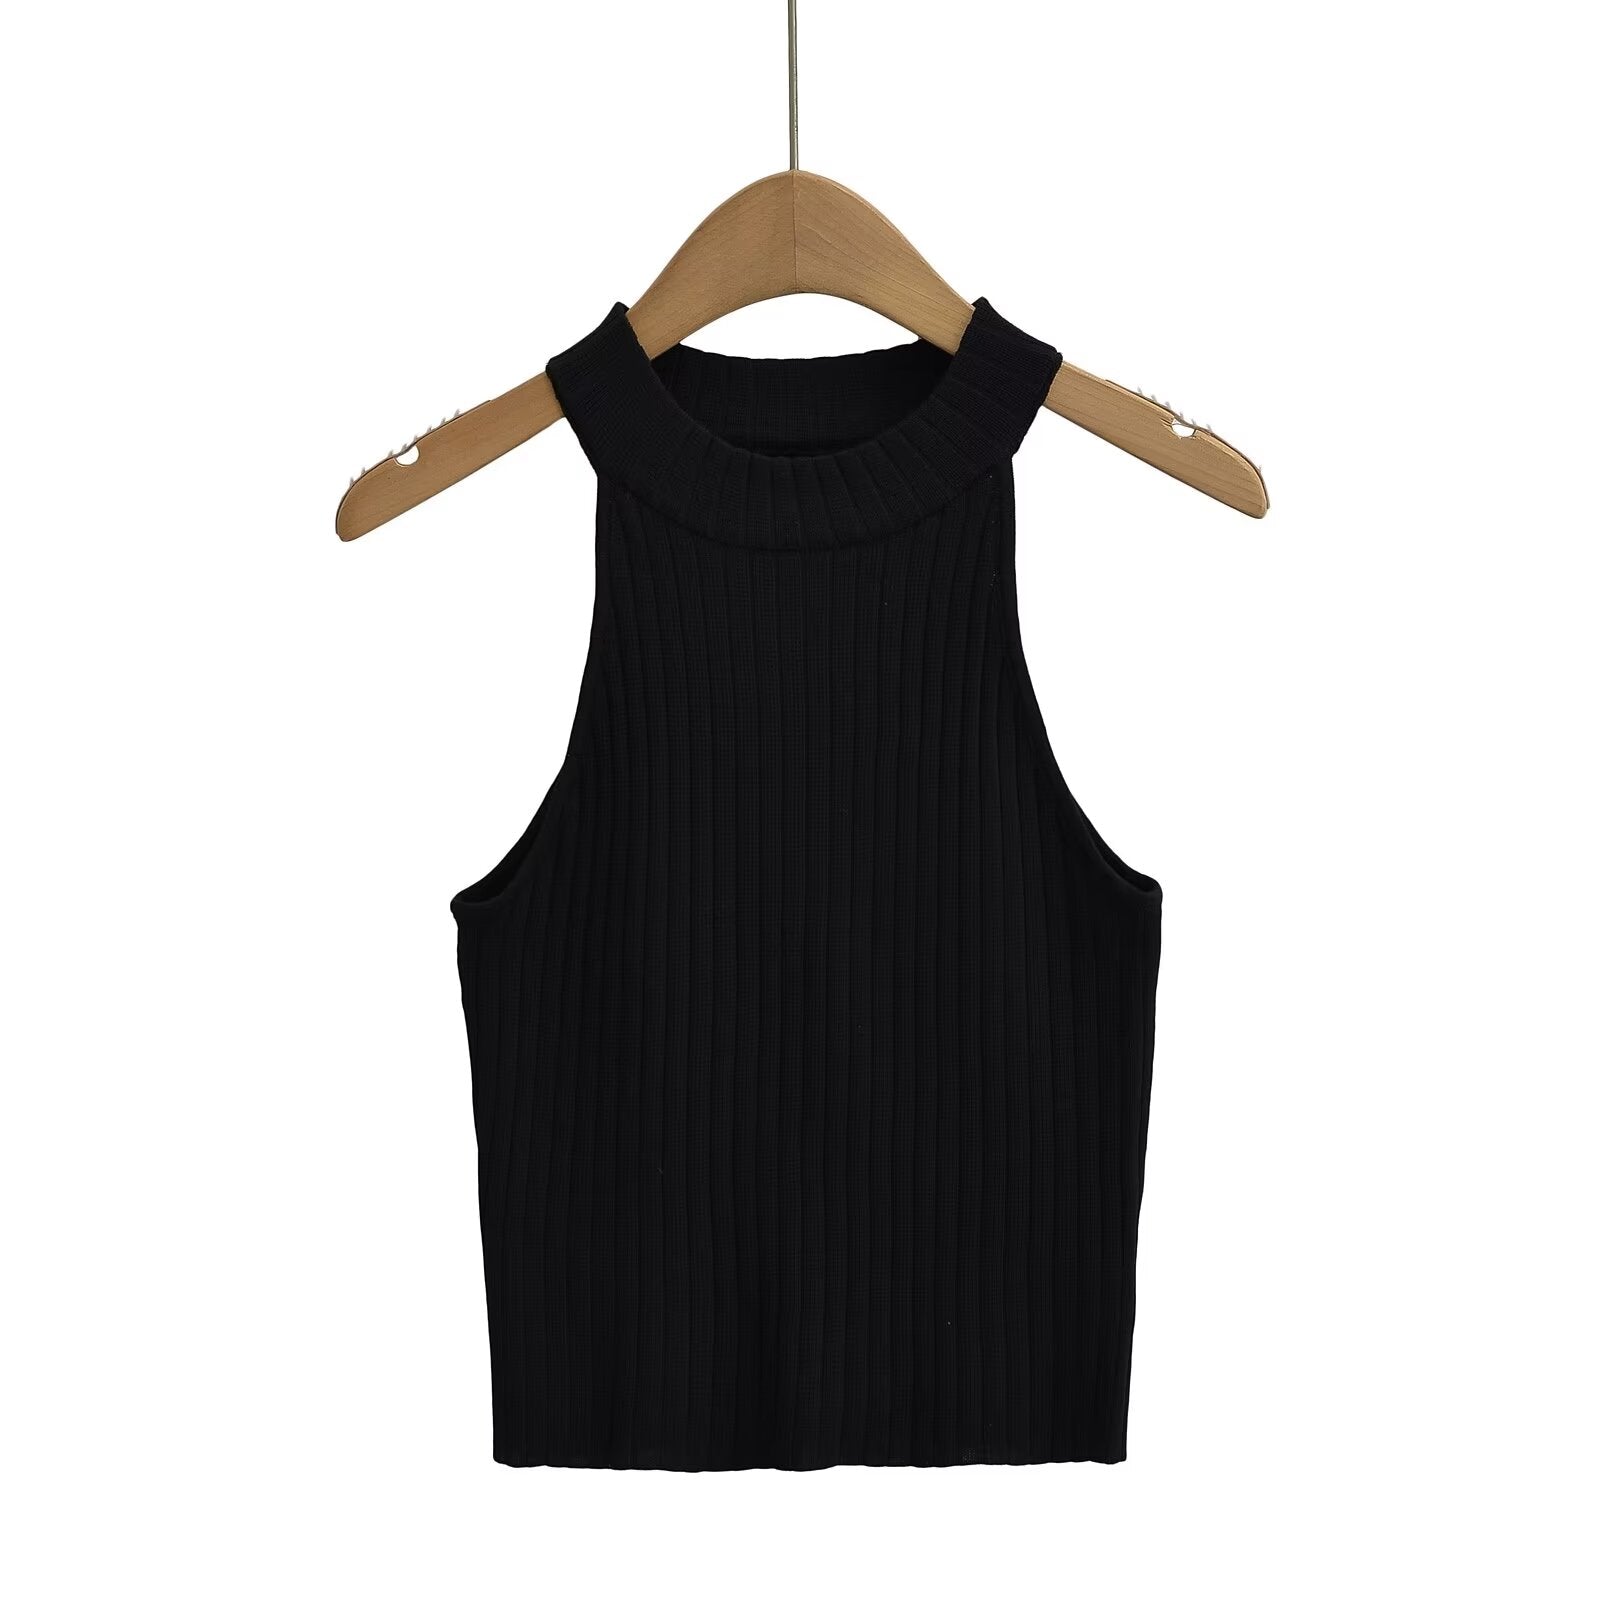 Vest Brand Women Clothing Thread Fitted Top Sexy Round Neck Bottoming Shirt